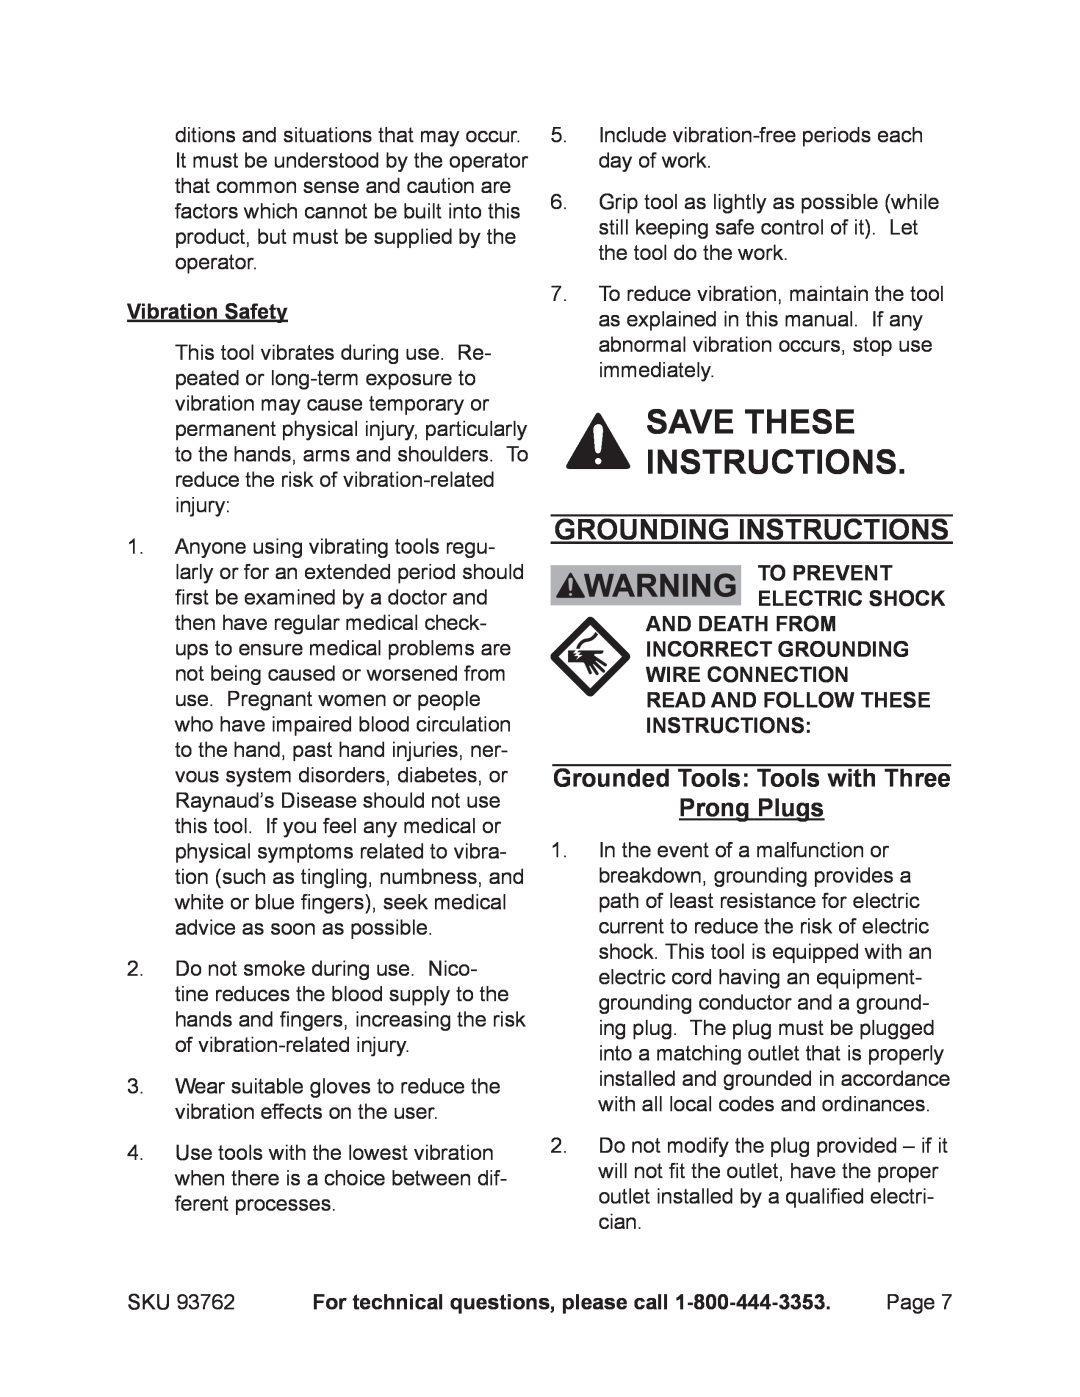 Harbor Freight Tools 93762 Save these instructions, Grounding Instructions, Vibration Safety, To prevent electric shock 